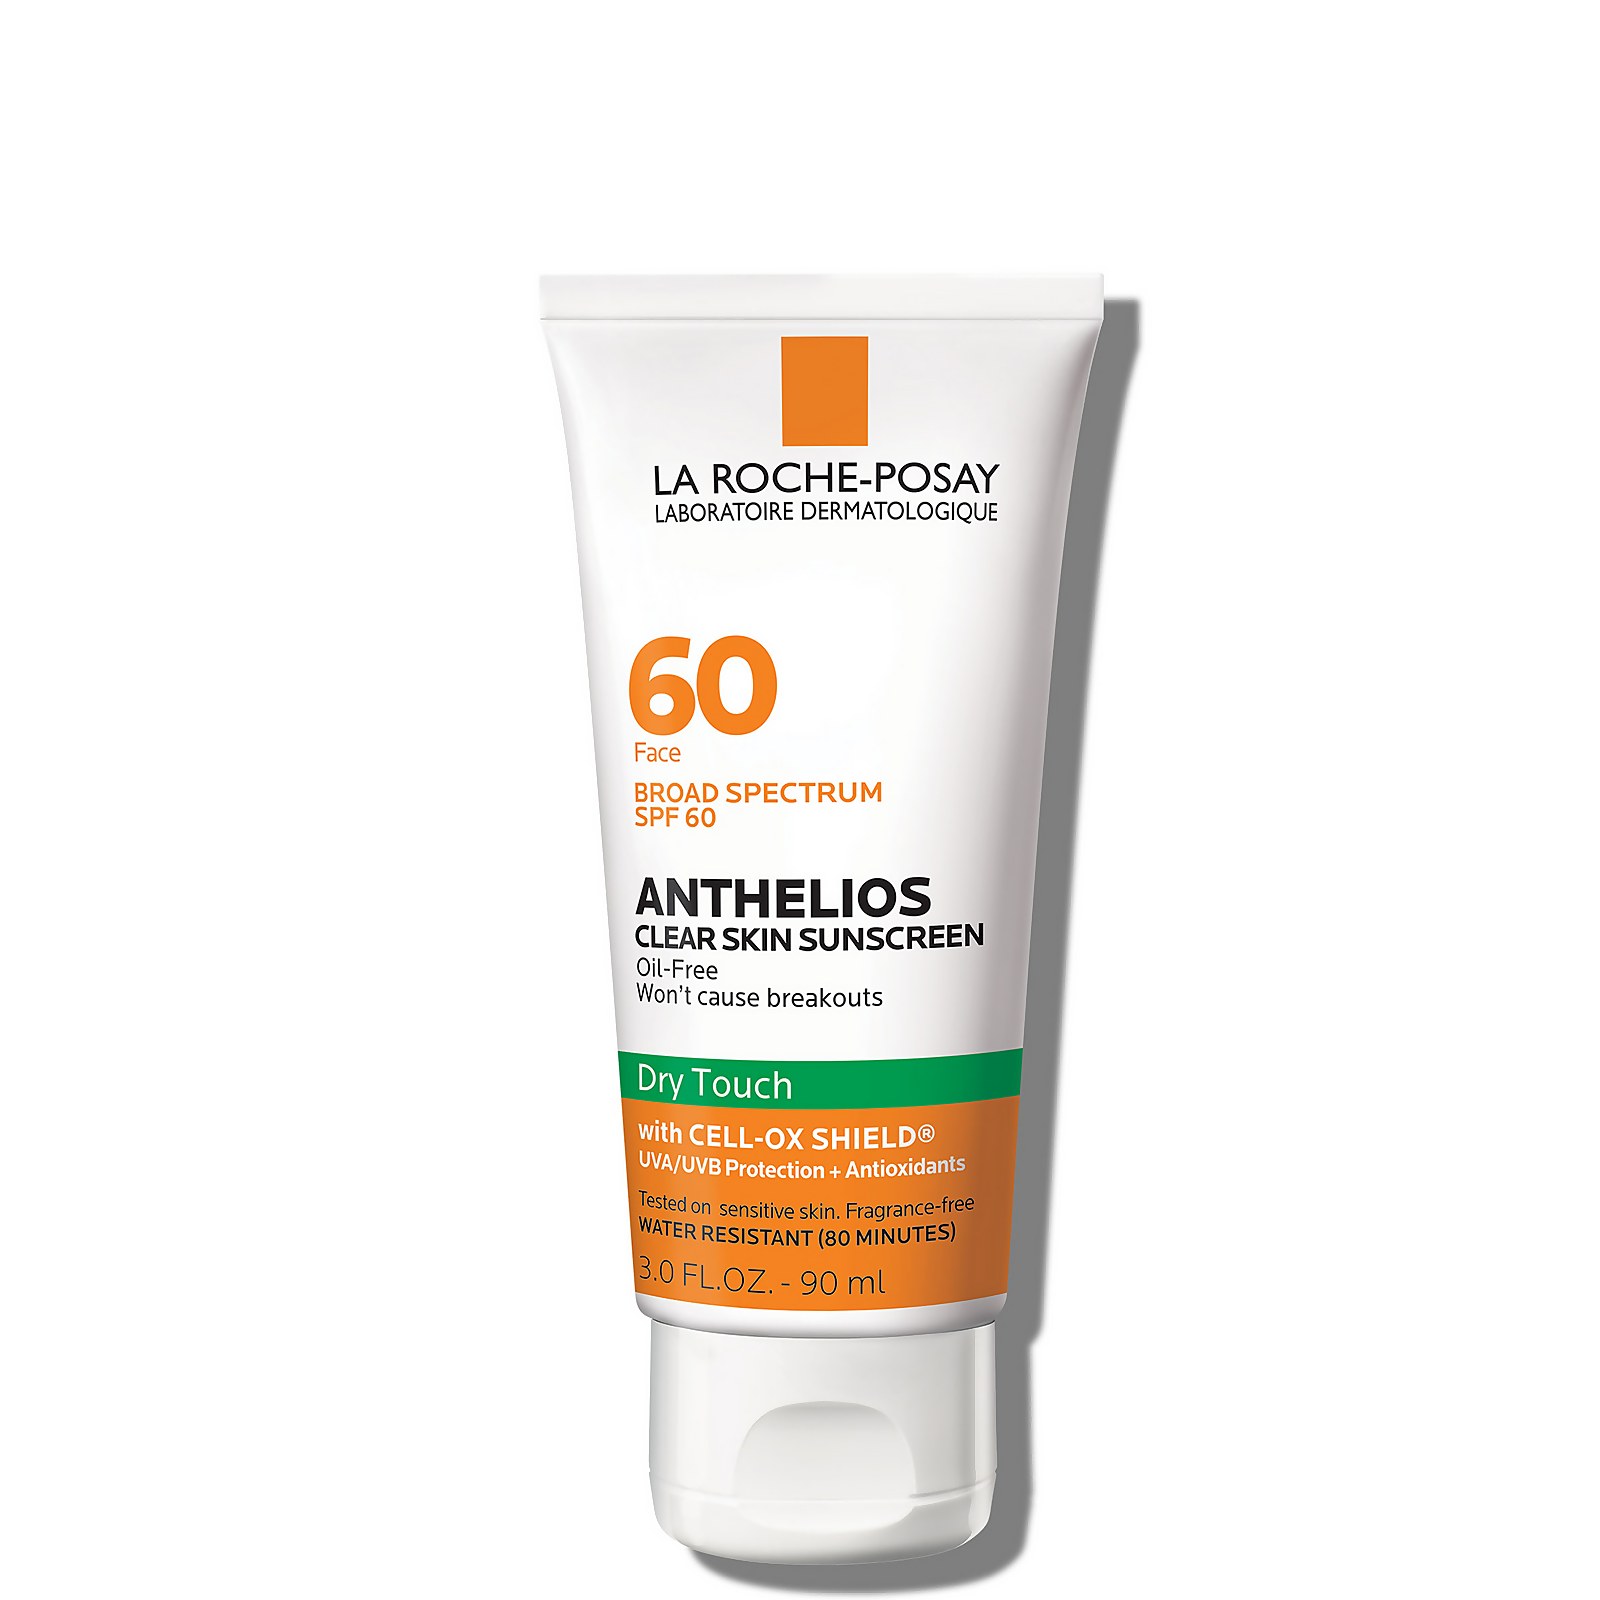 La Roche-posay Anthelios Clear Skin Dry Touch Sunscreen Spf 60 (various Sizes)